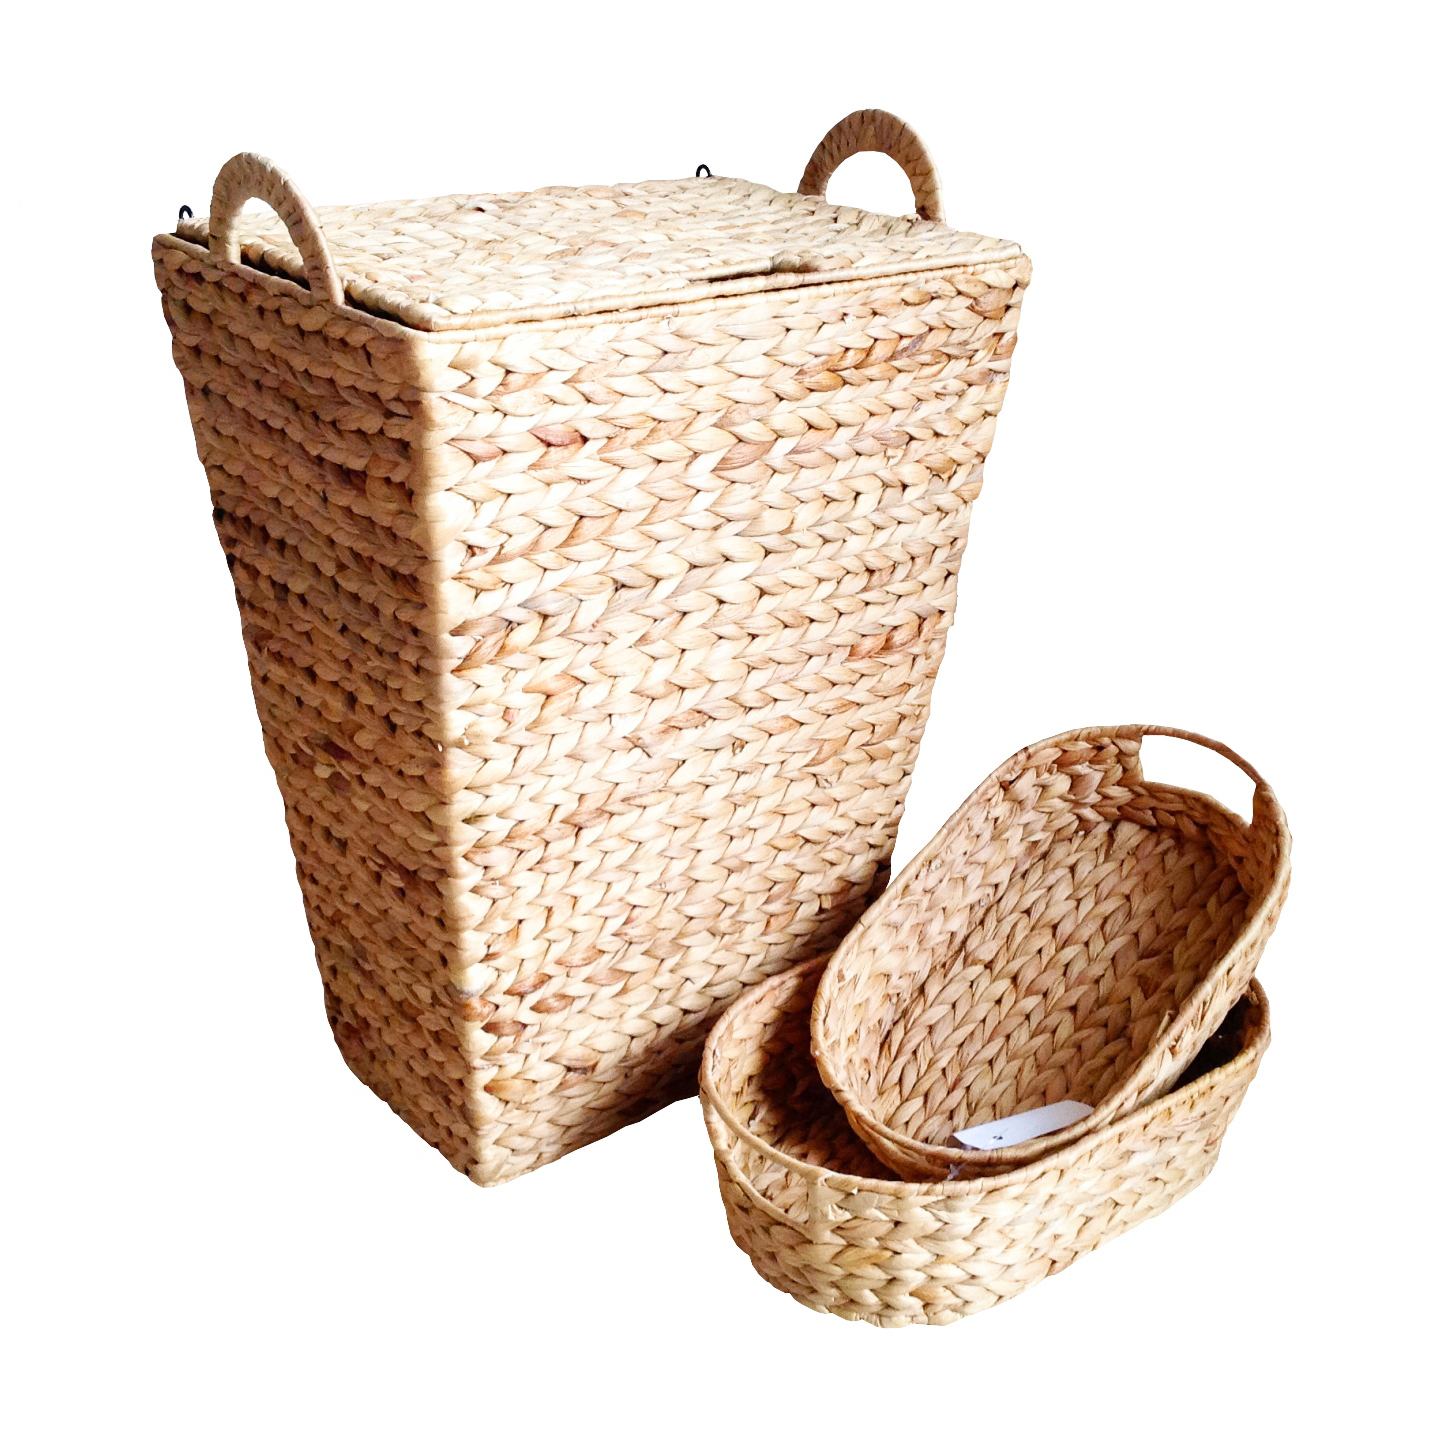 Good Price Rectangular Water Hyacinth Hamper Covered With Lids And 2 Small Baskets Handles On Both Sides Are Easy To Move 6